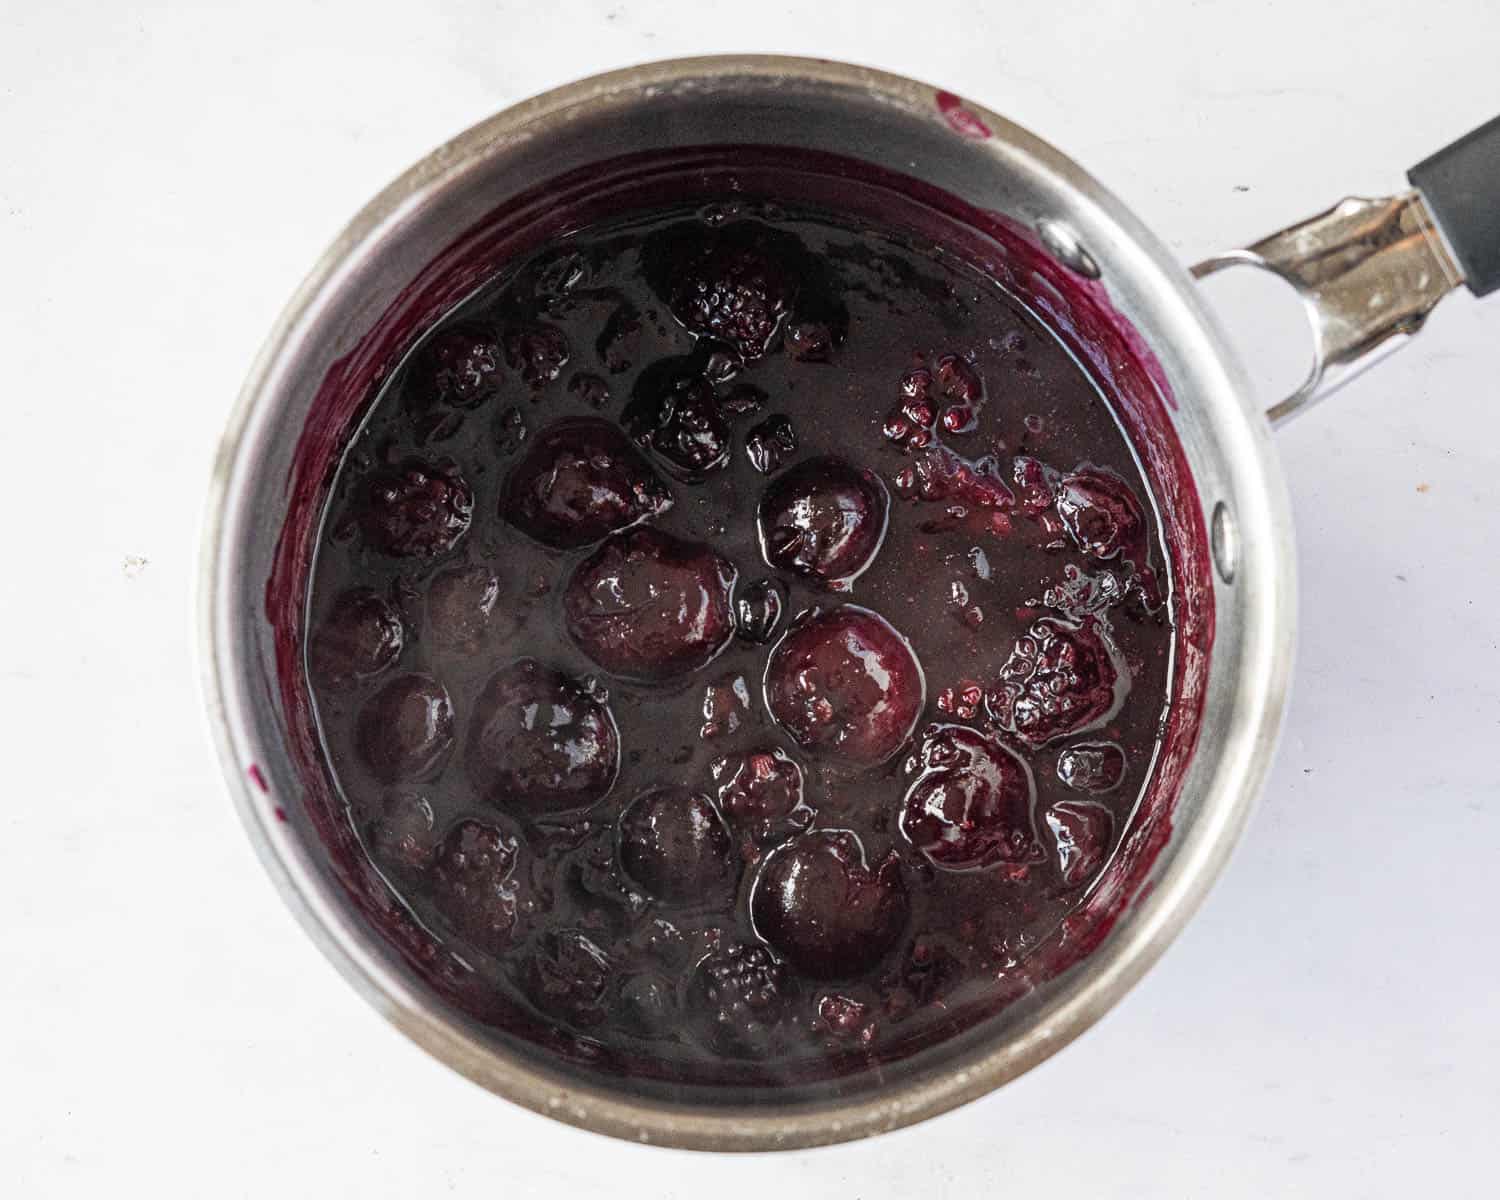 Step 3, the cooked berry compote.